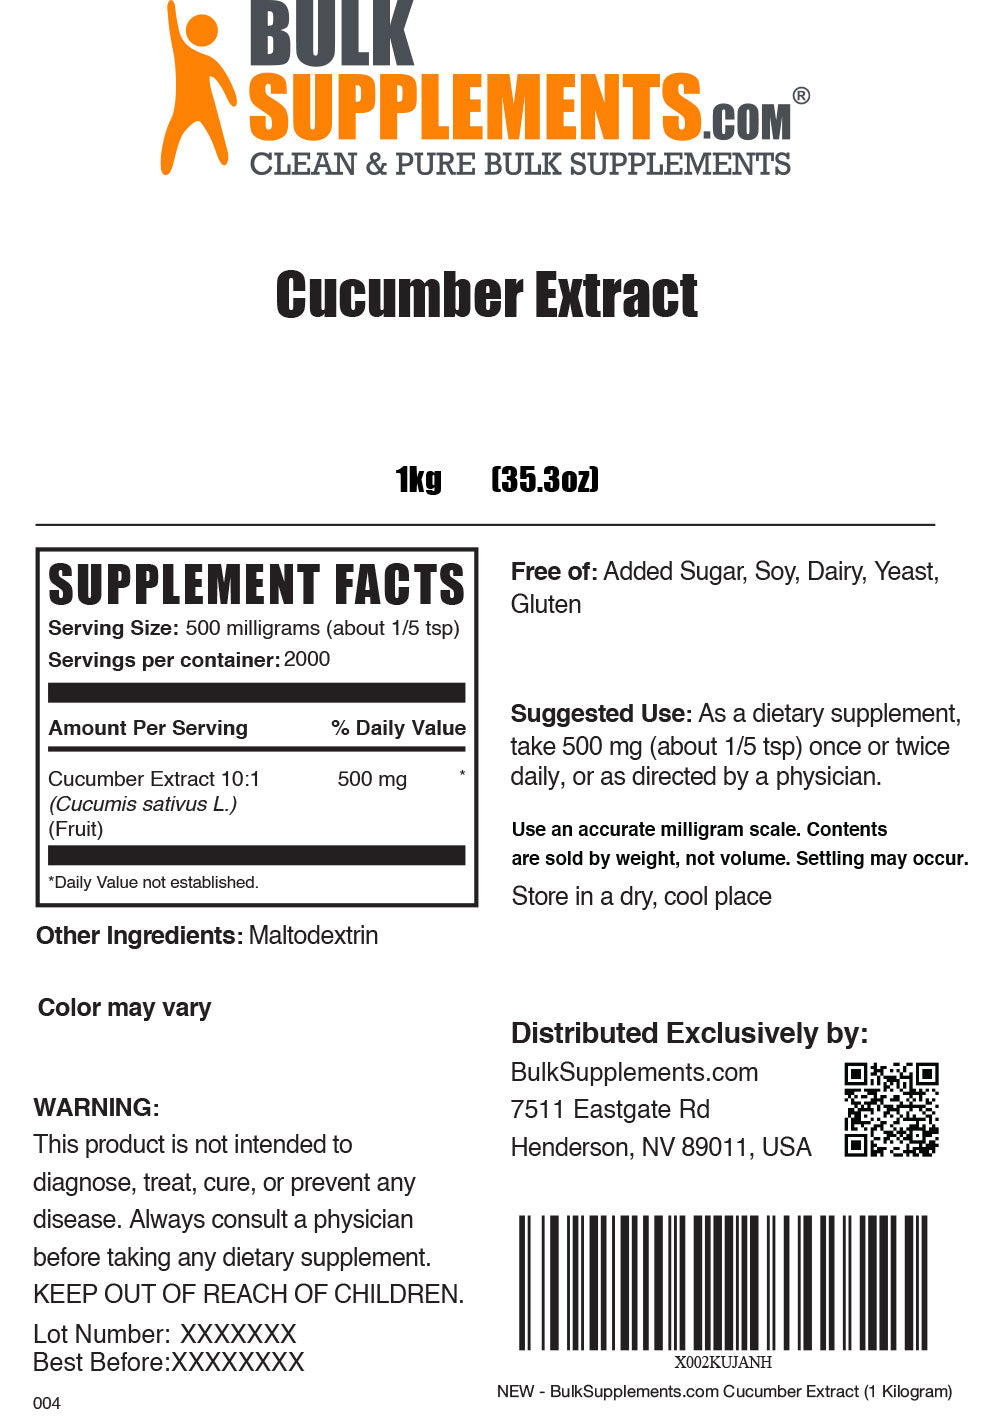 1kg Cucumber Extract Supplement Facts